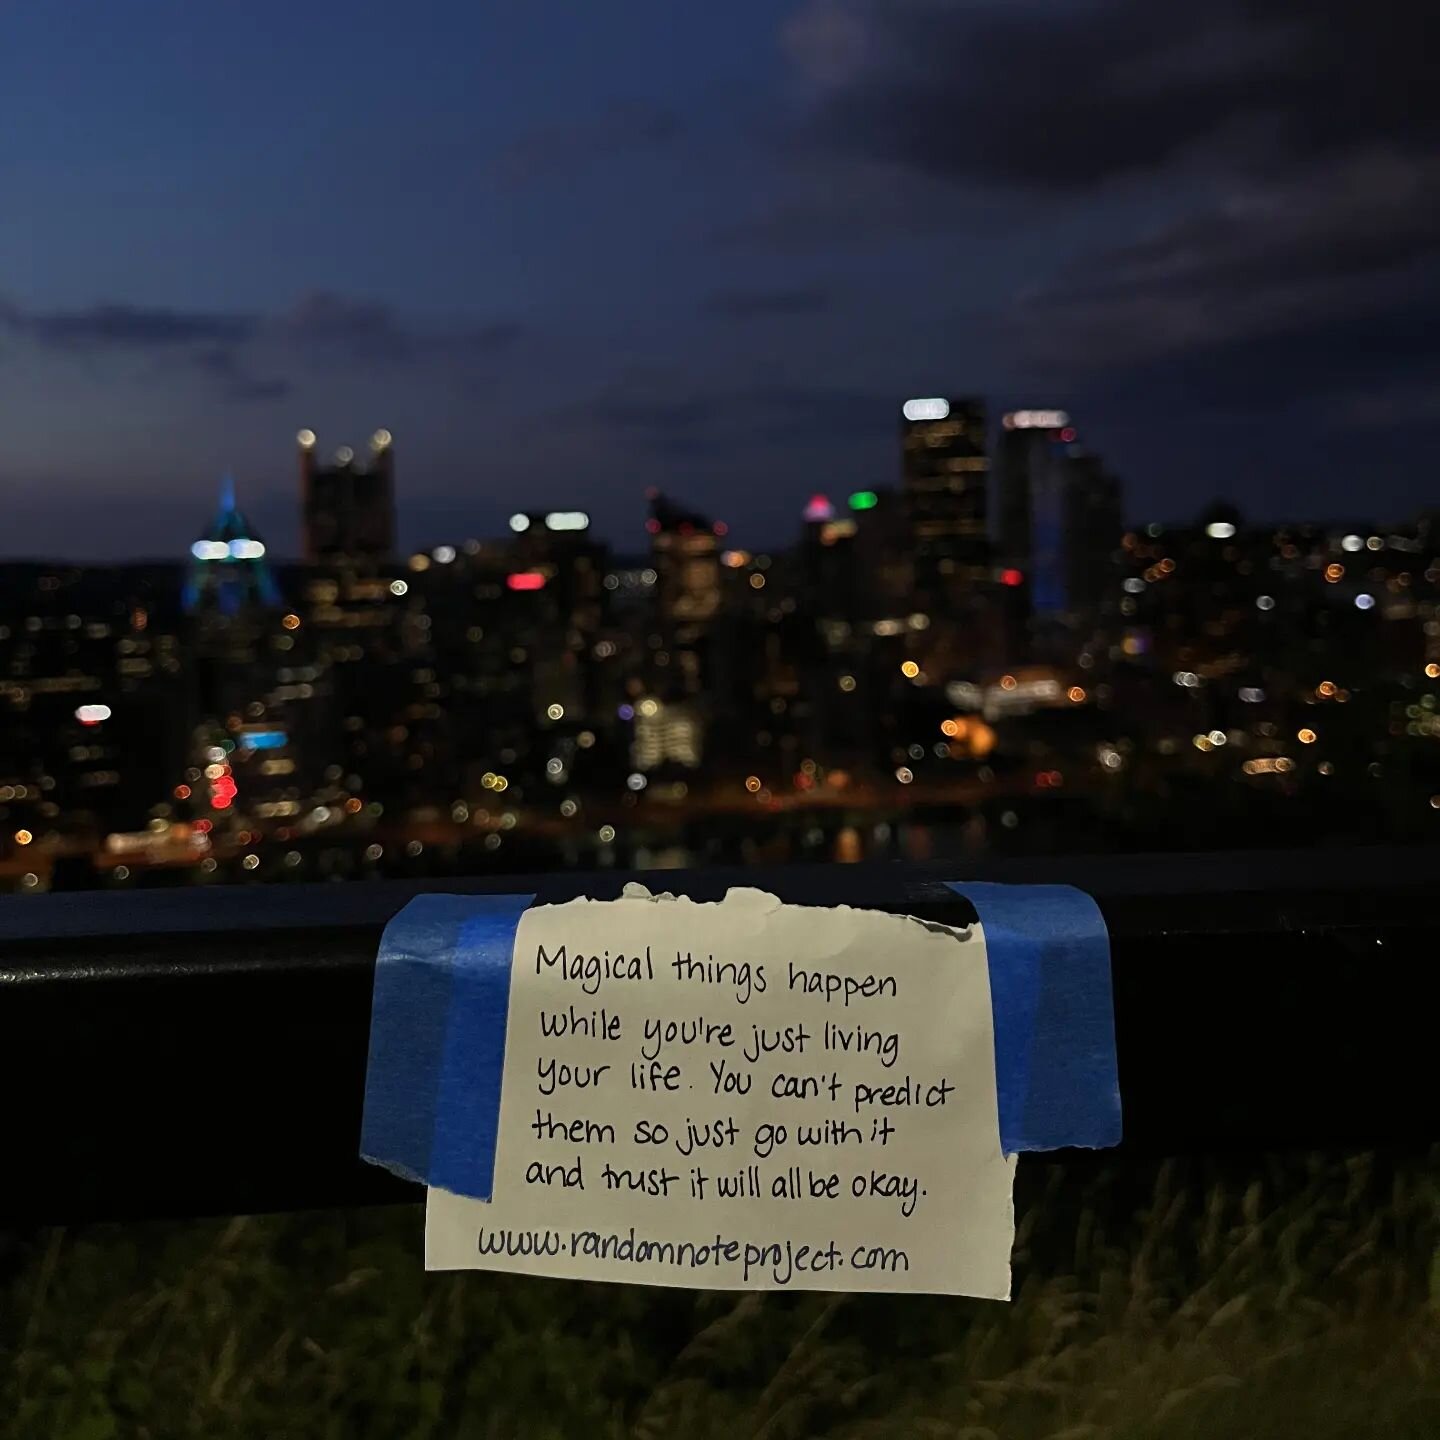 Shreedi found a note while looking over the city of Pittsburgh at twilight and writes, &quot;[It gave me] courage to keep going! everything will end out okay no matter the circumstances:)&quot;

The note says, &quot;Magical things happen while you're